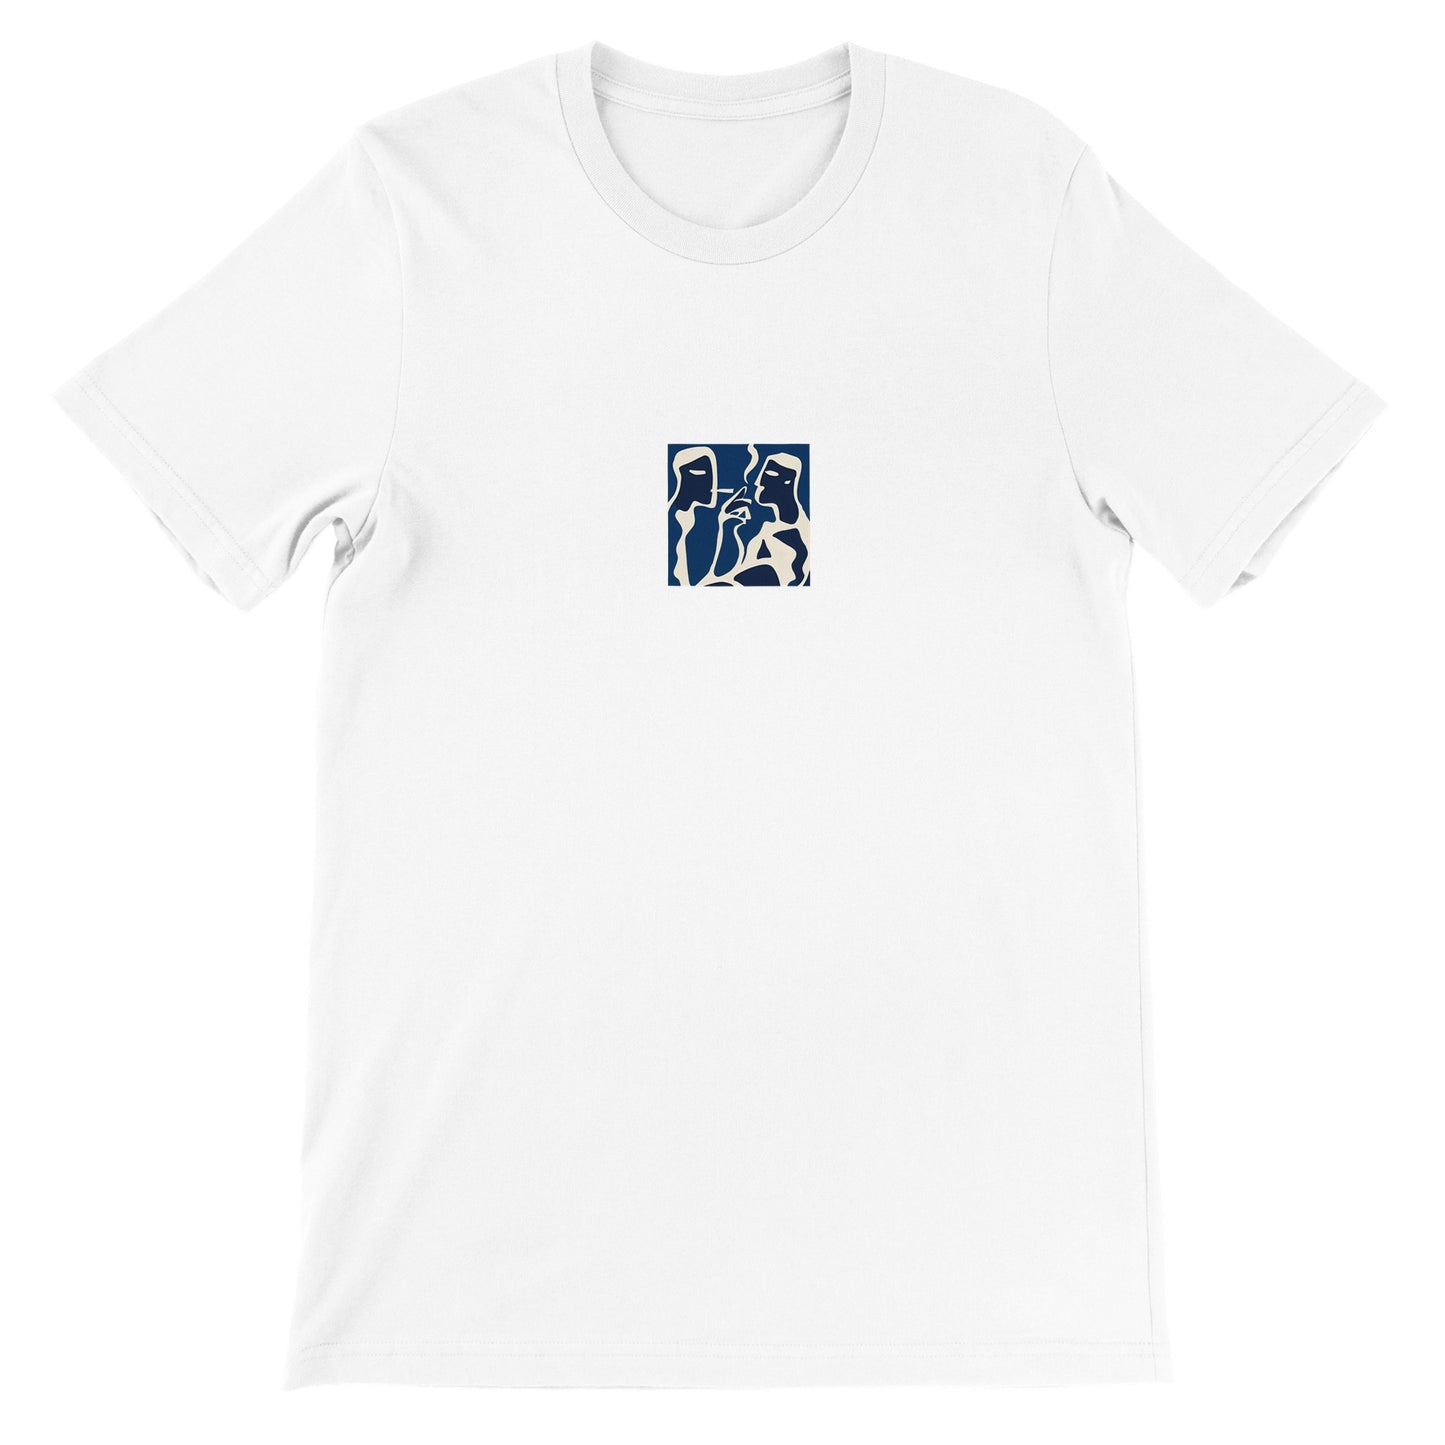 fumigans fratribus / SS23 / T-shirt / white